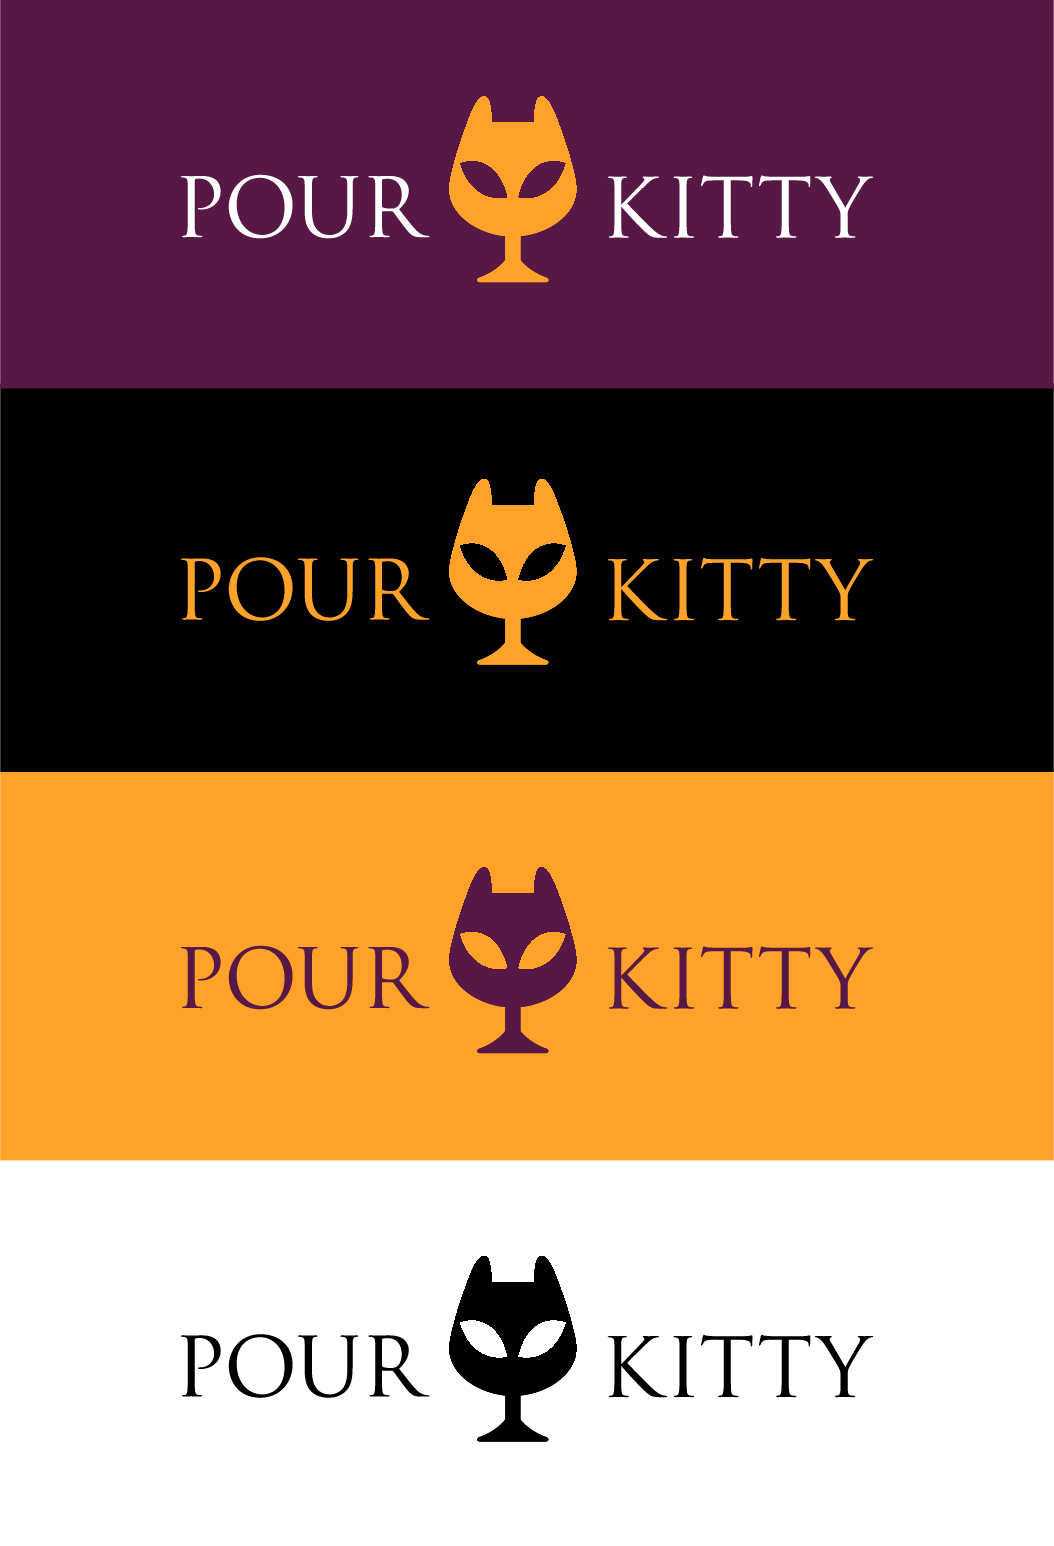 Pour Kitty logo color variations created by Sanczel Designs